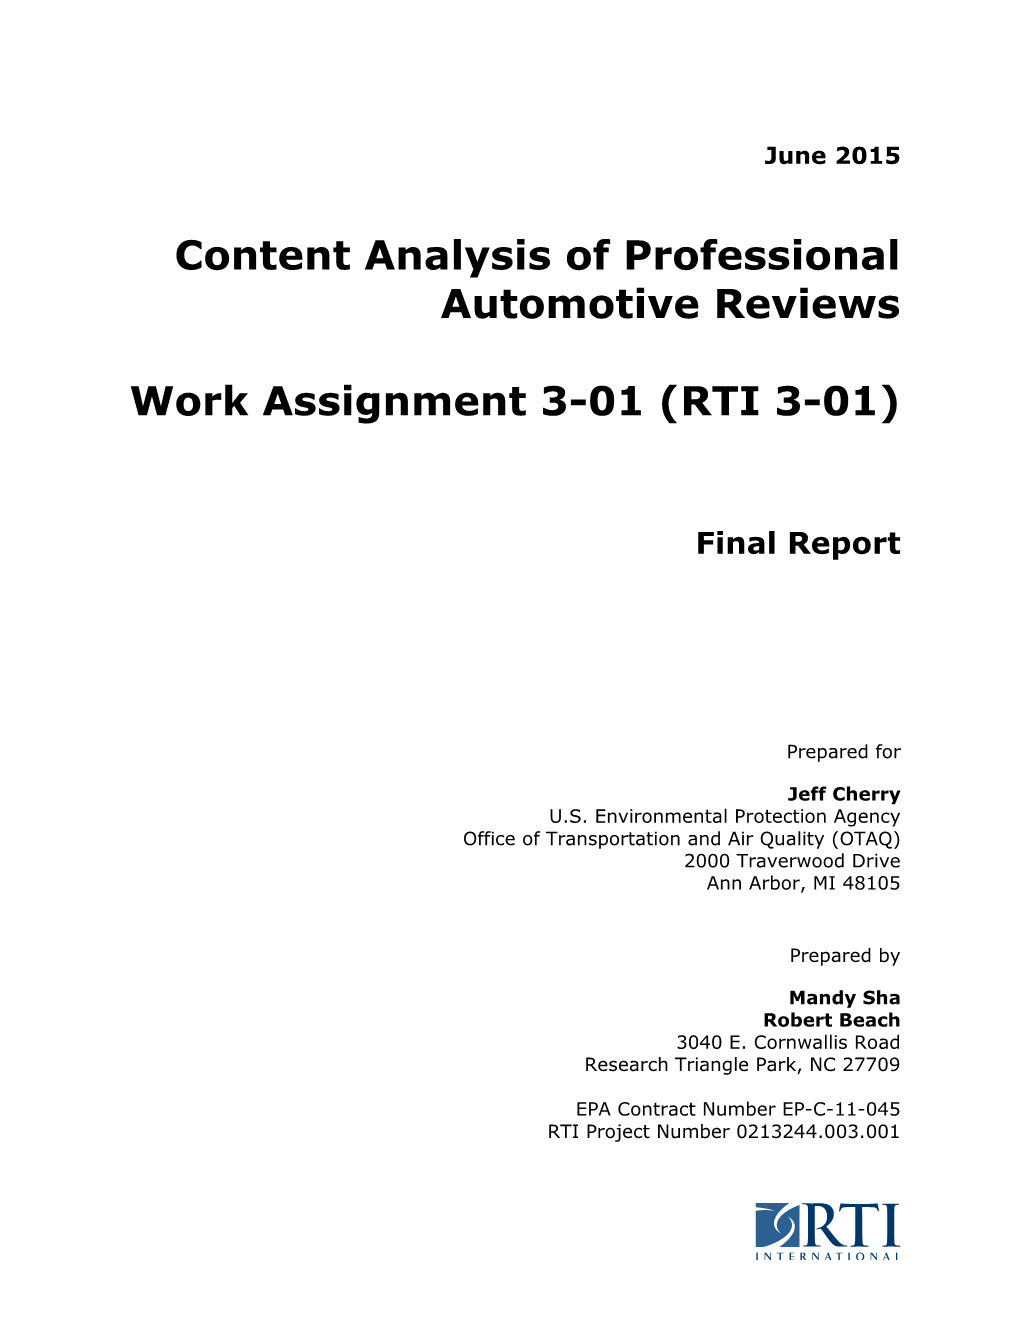 Content Analysis of Professional Automotive Reviews Work